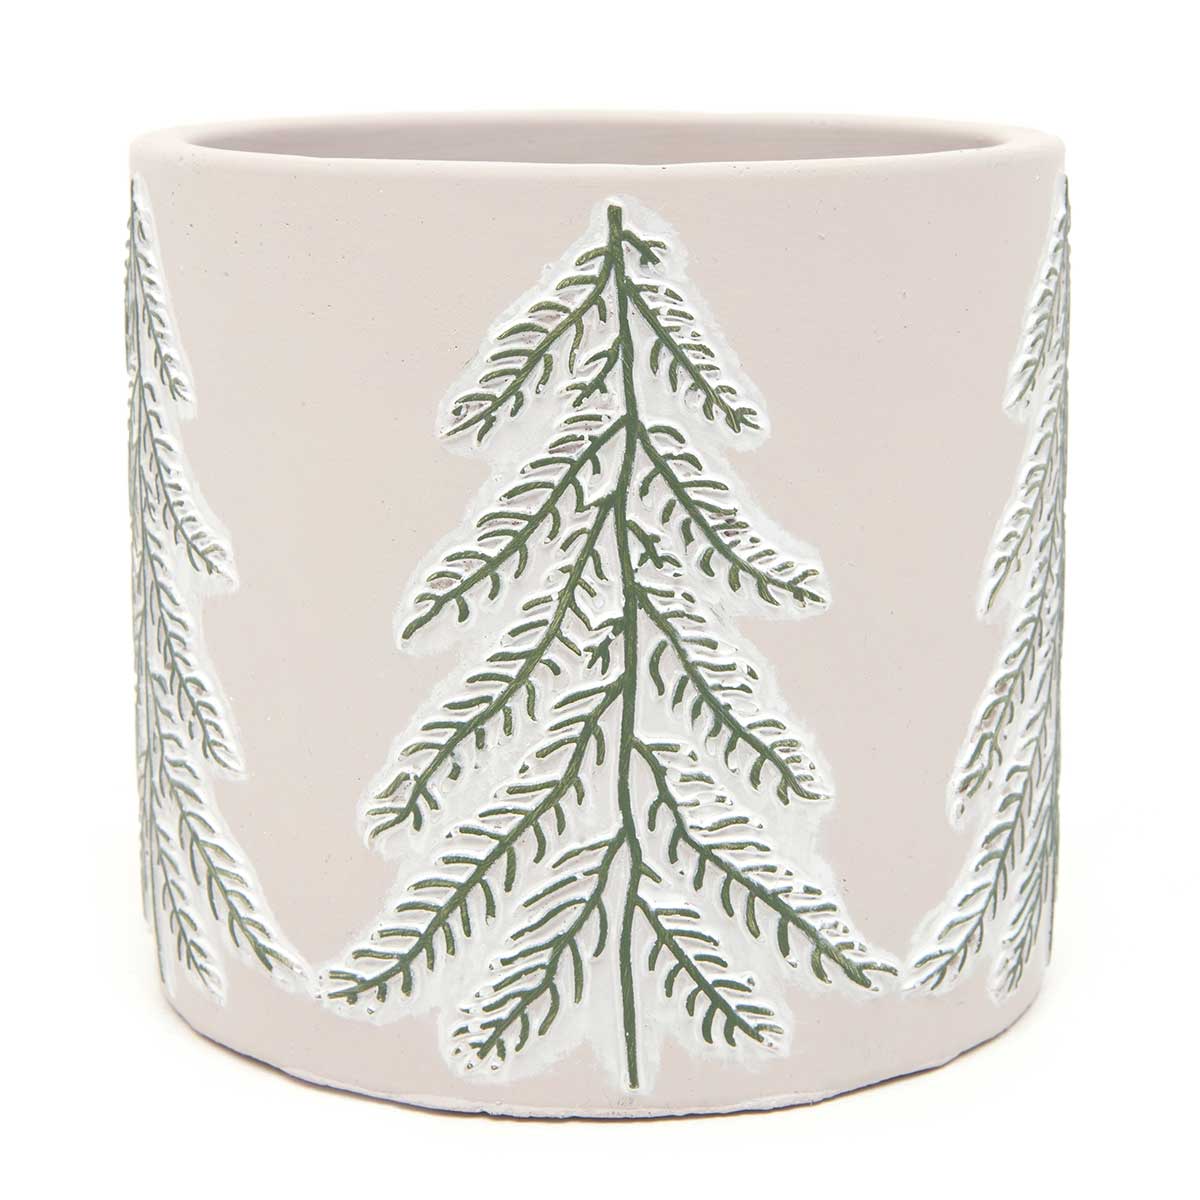 POT WINTER GREEN TREE LARGE 5.75IN X 5IN CREAM/GREEN - Click Image to Close